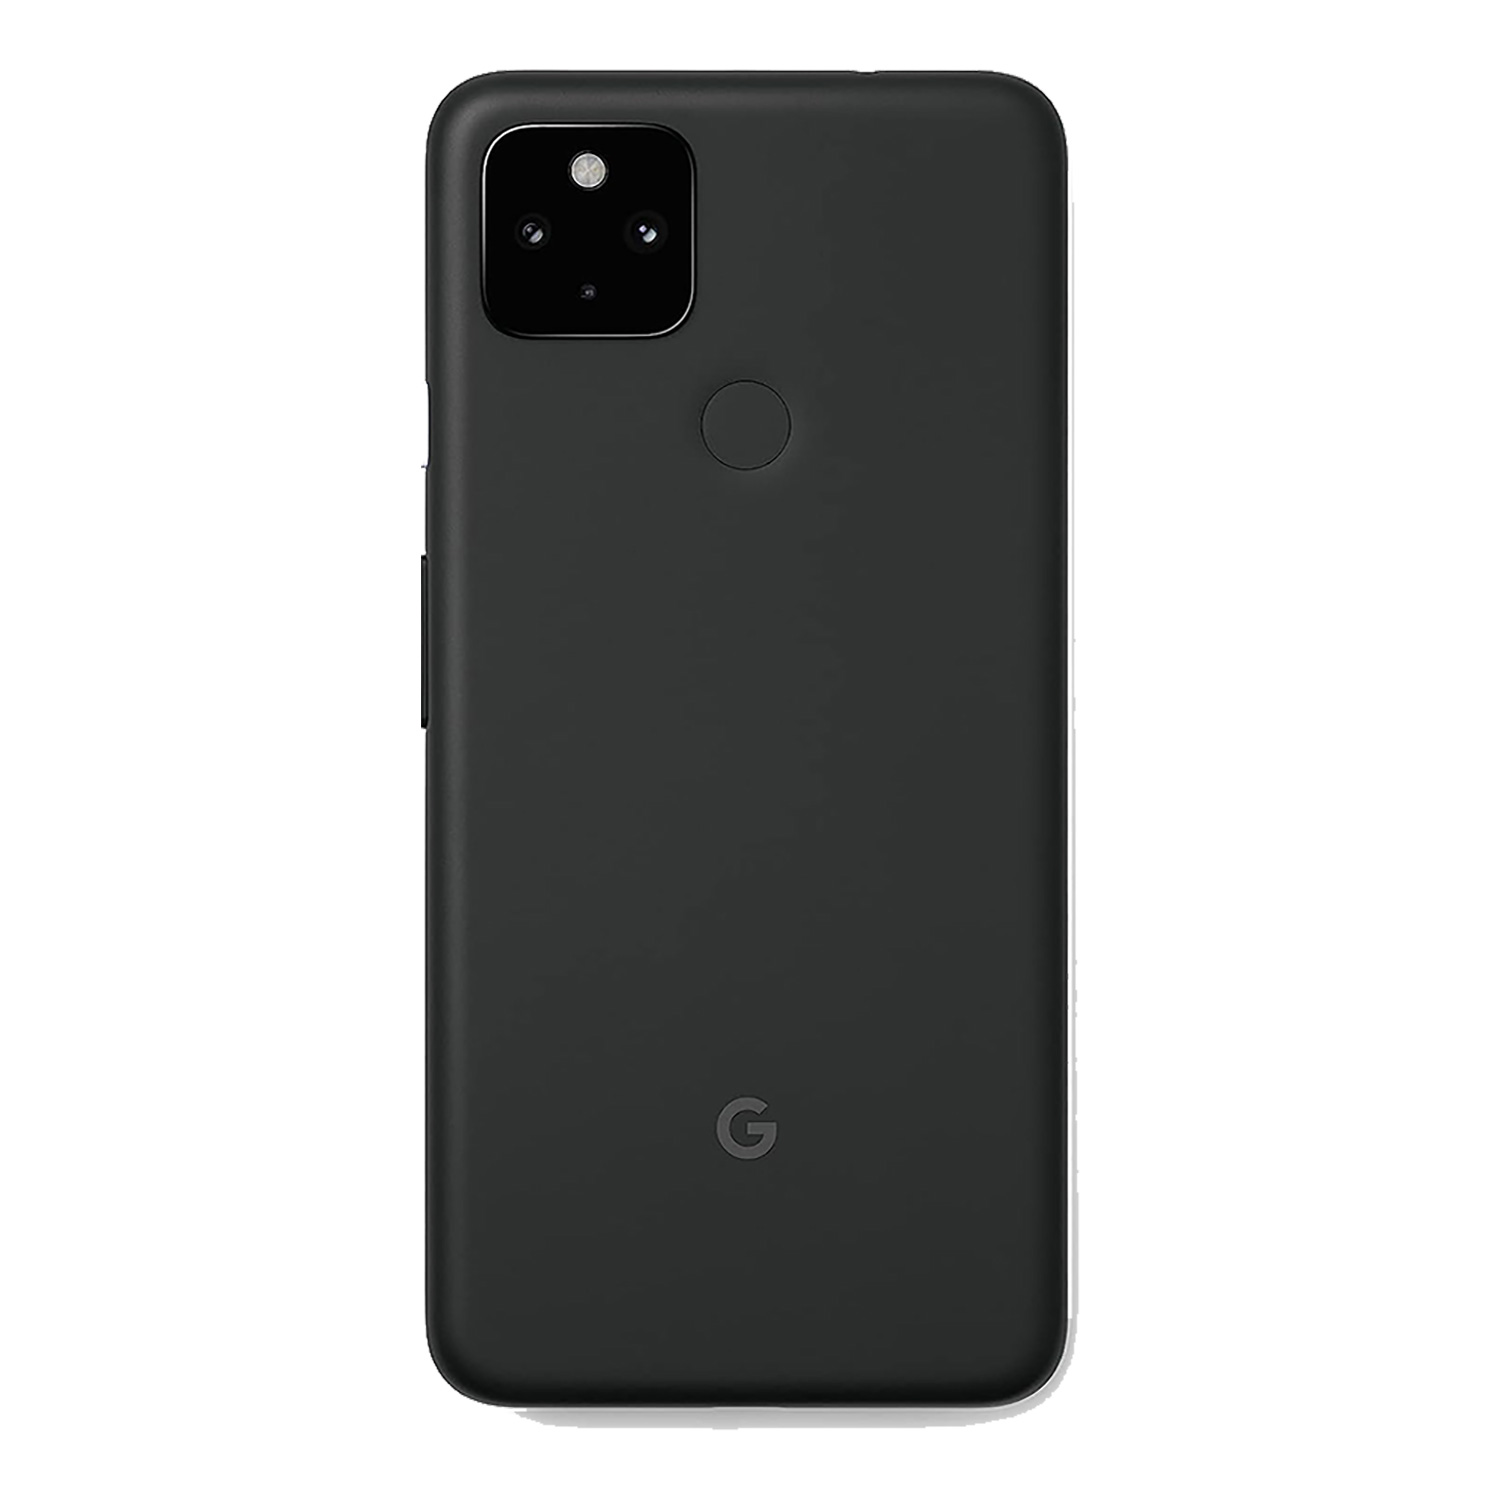 Google Pixel 4a 5g 128GB Black - Pladinum - full service web hosting and IT  security